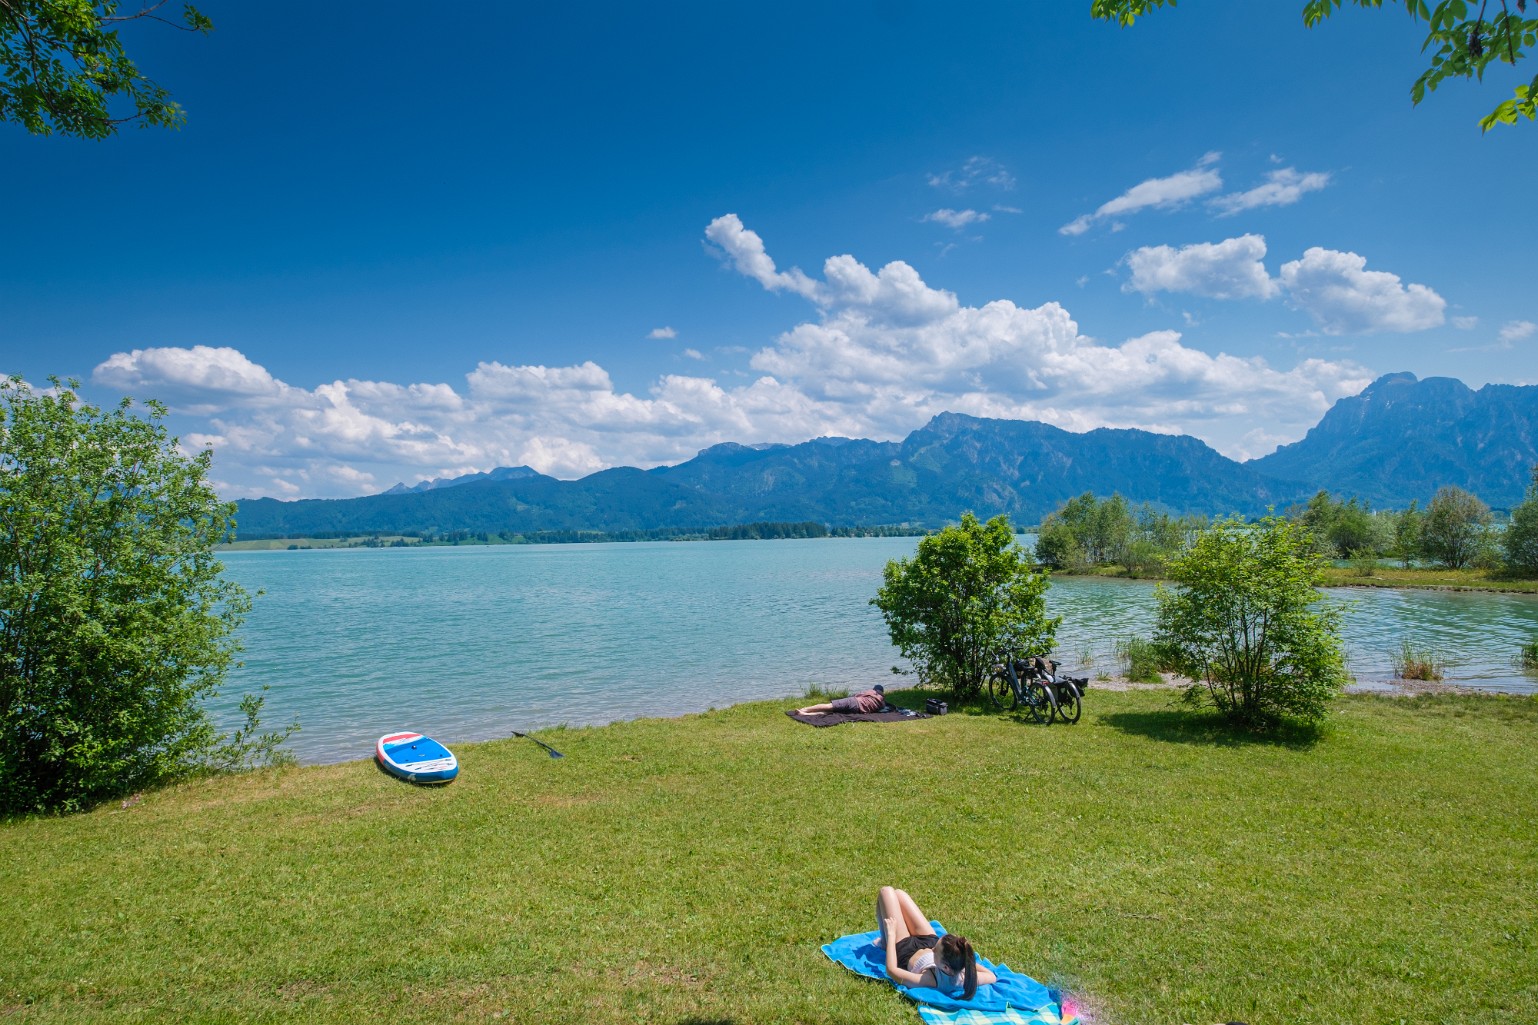 Forggensee_0523_2023-06-X-T4_12,6mm_f6,4_800s_160 ISO_LR_4kPx